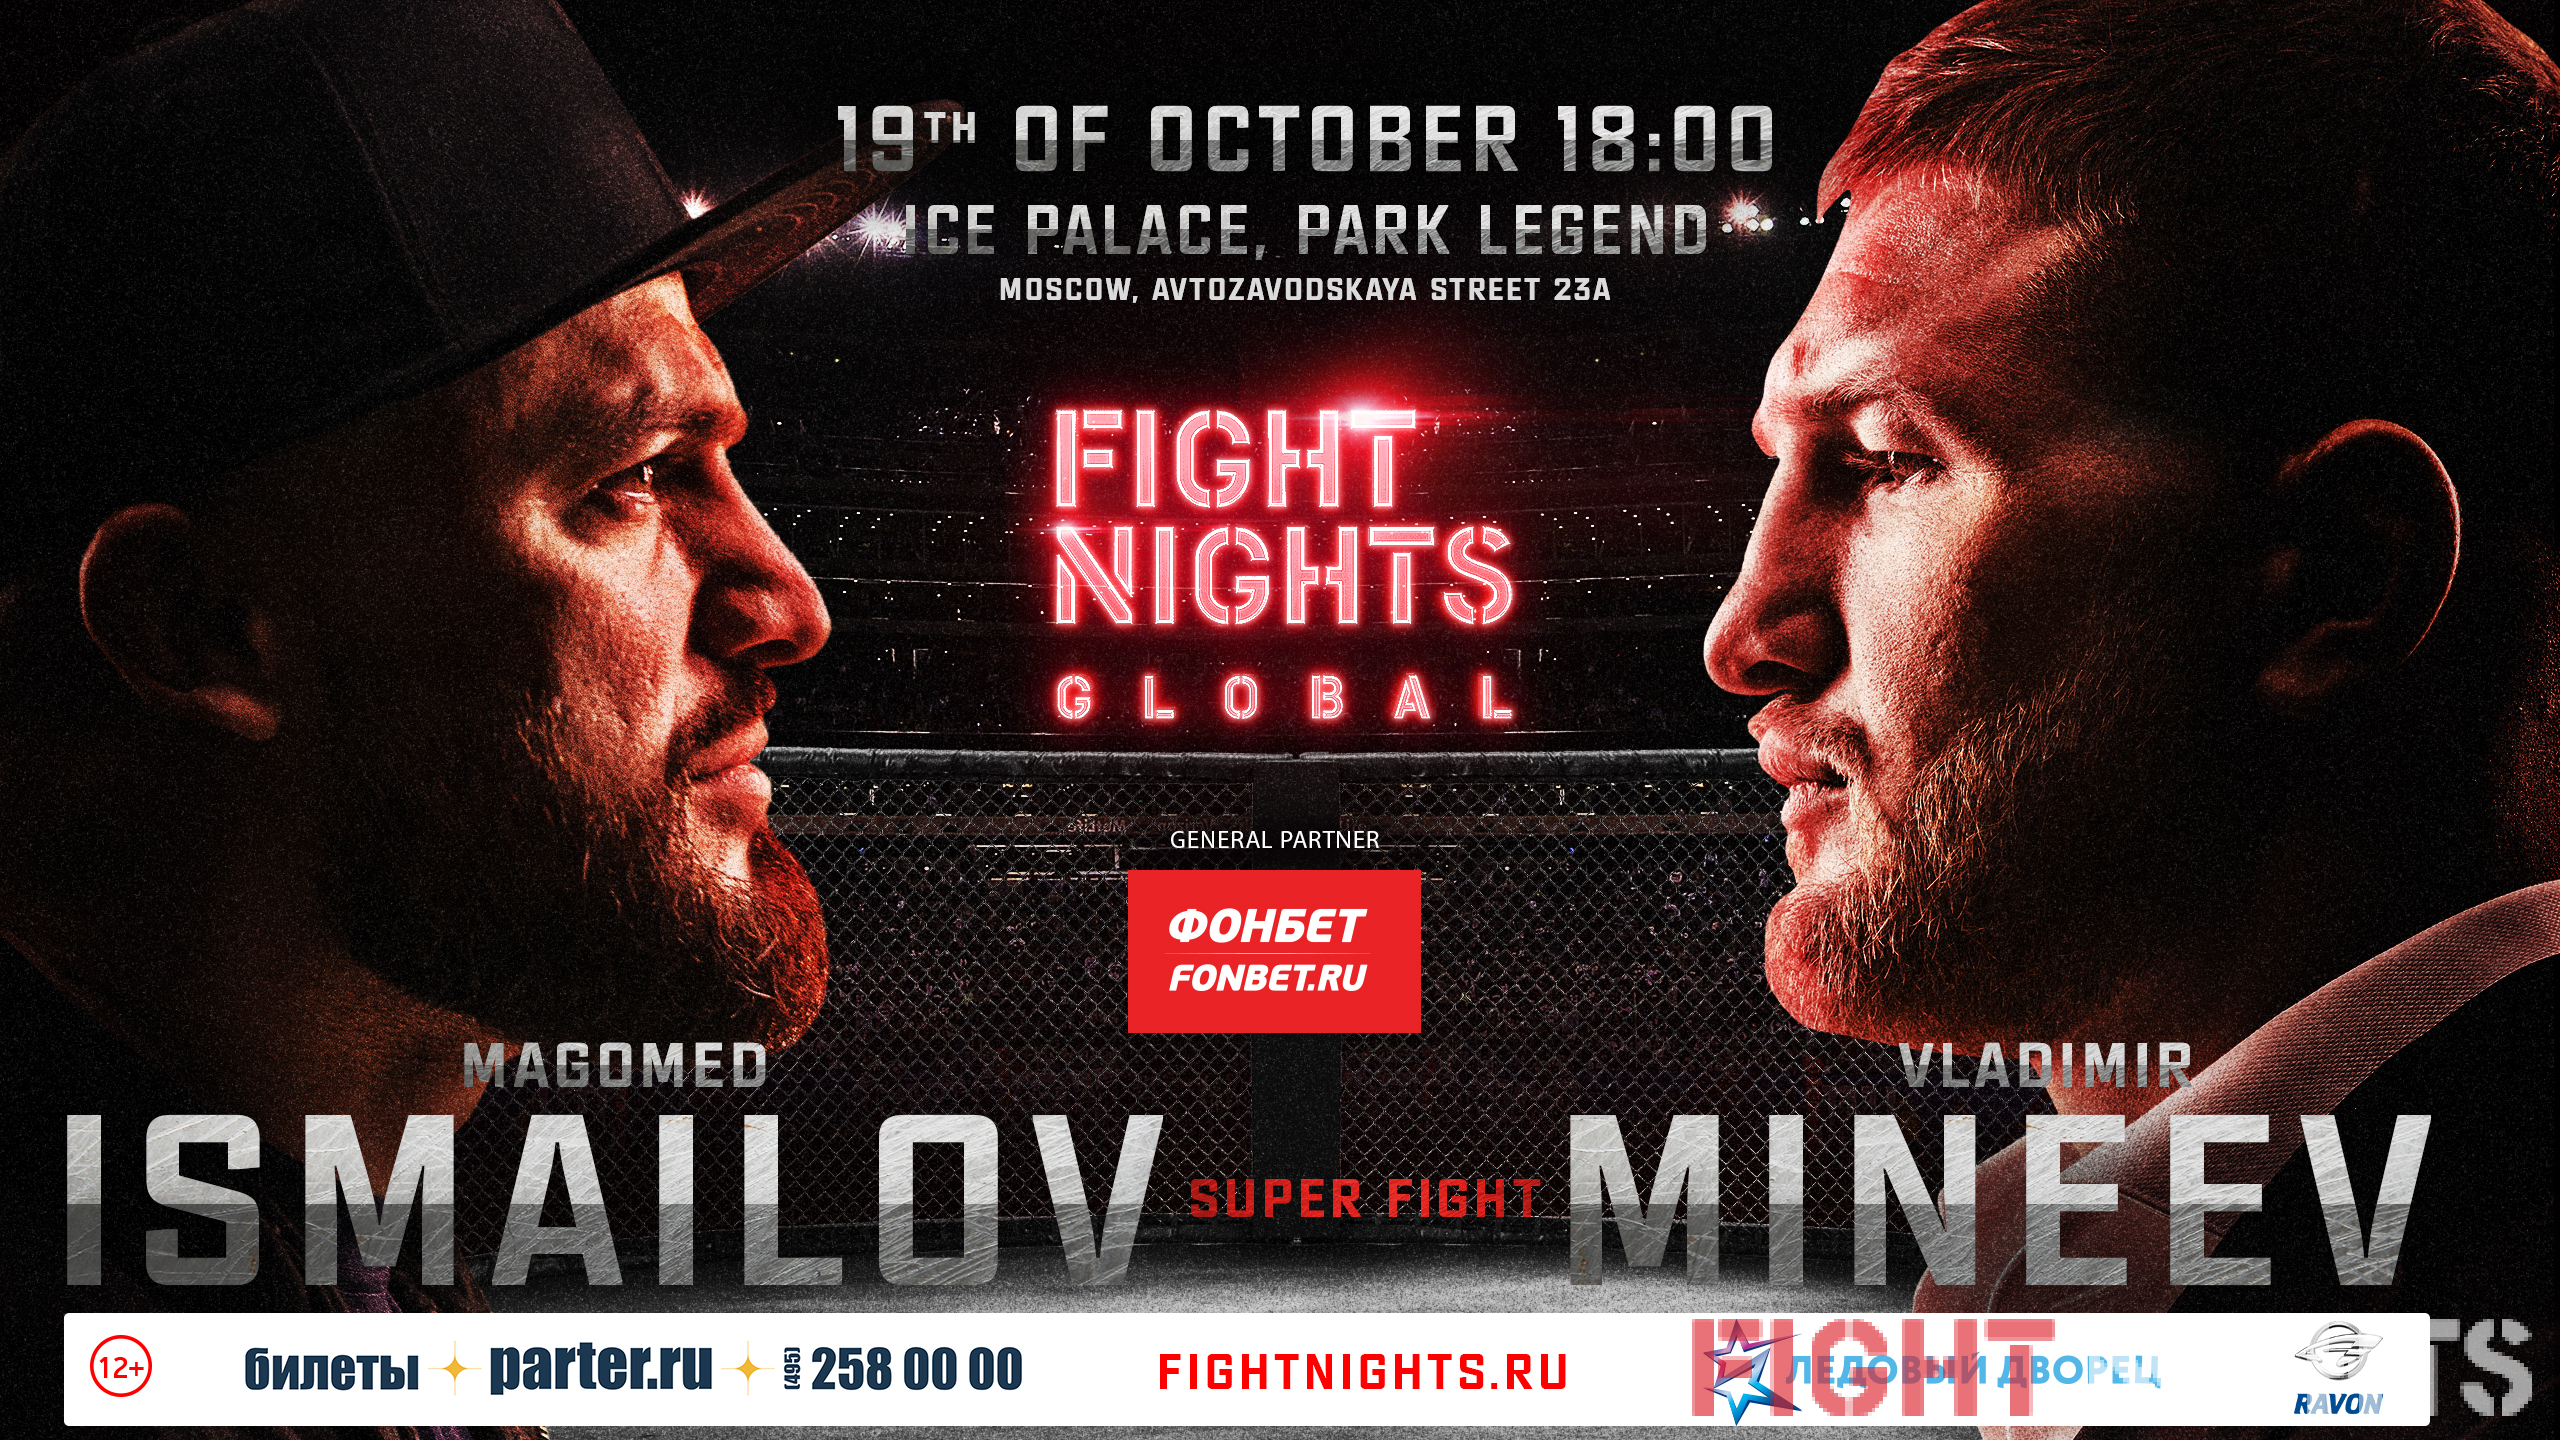 You was waiting for this event and it is happening soon! 19th of October - the most expected event in the Russian MMA - Mineev vs. Ismailov at the FIGHT NIGHTS GLOBAL!